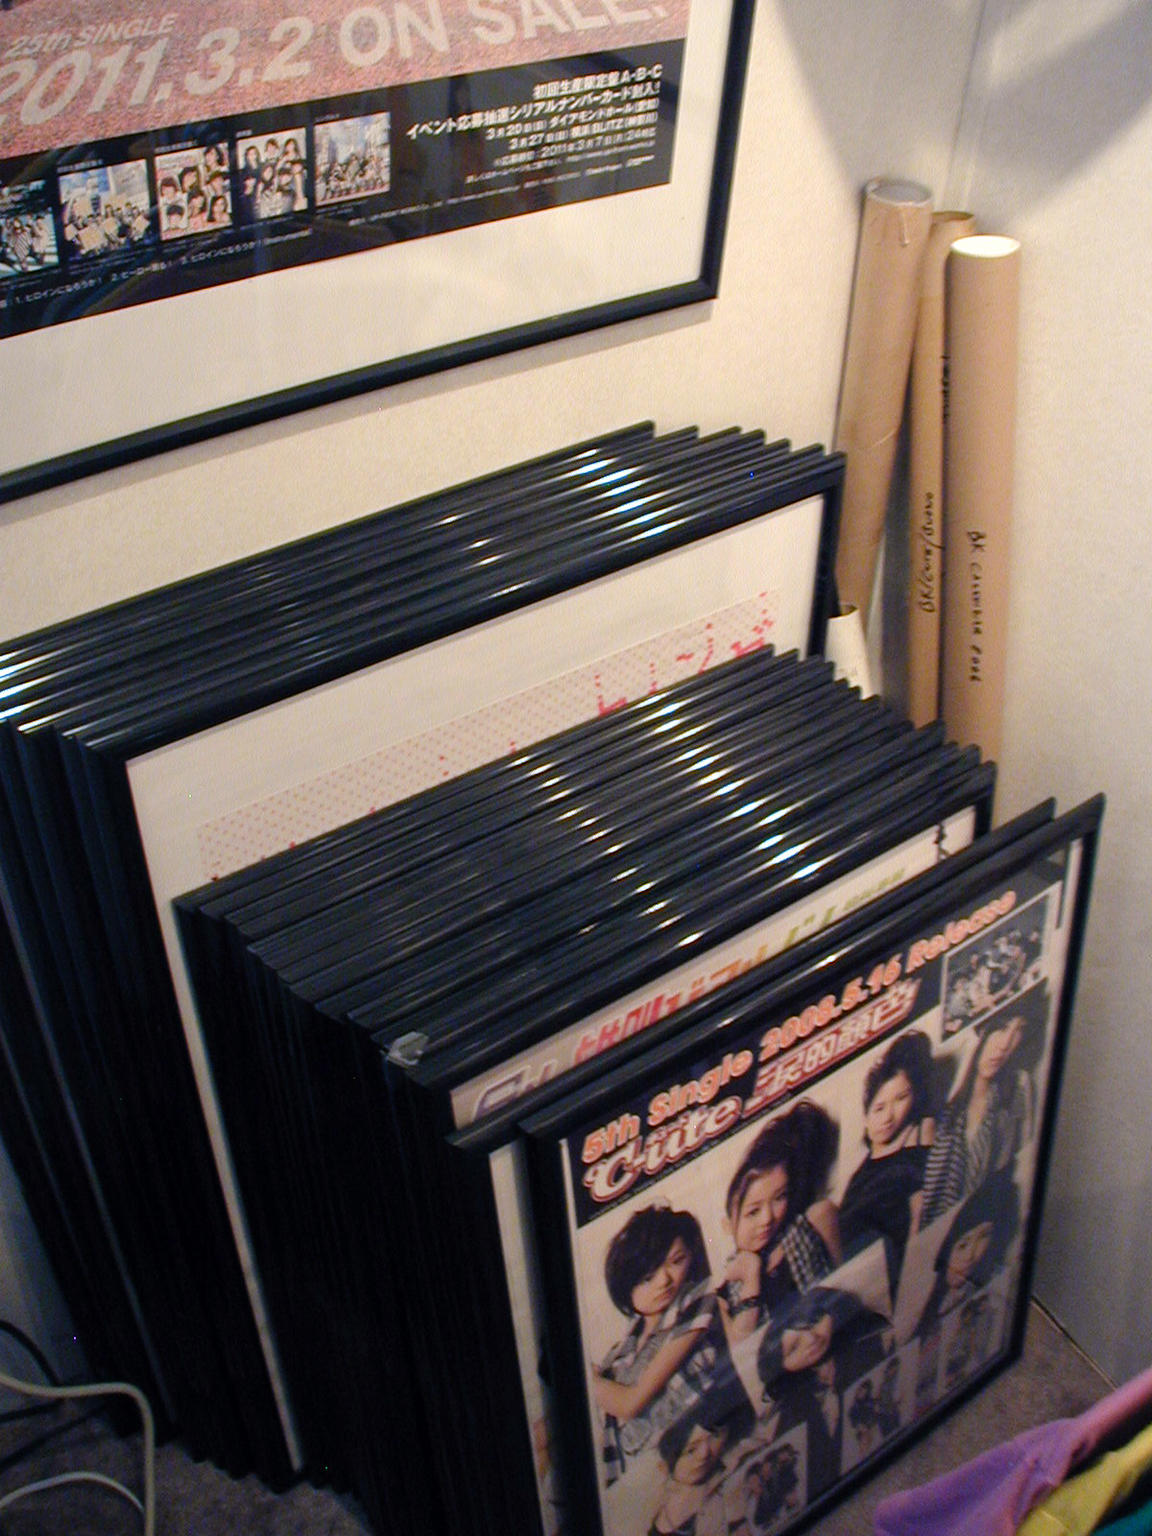 Framed H!P Posters with no place to go...